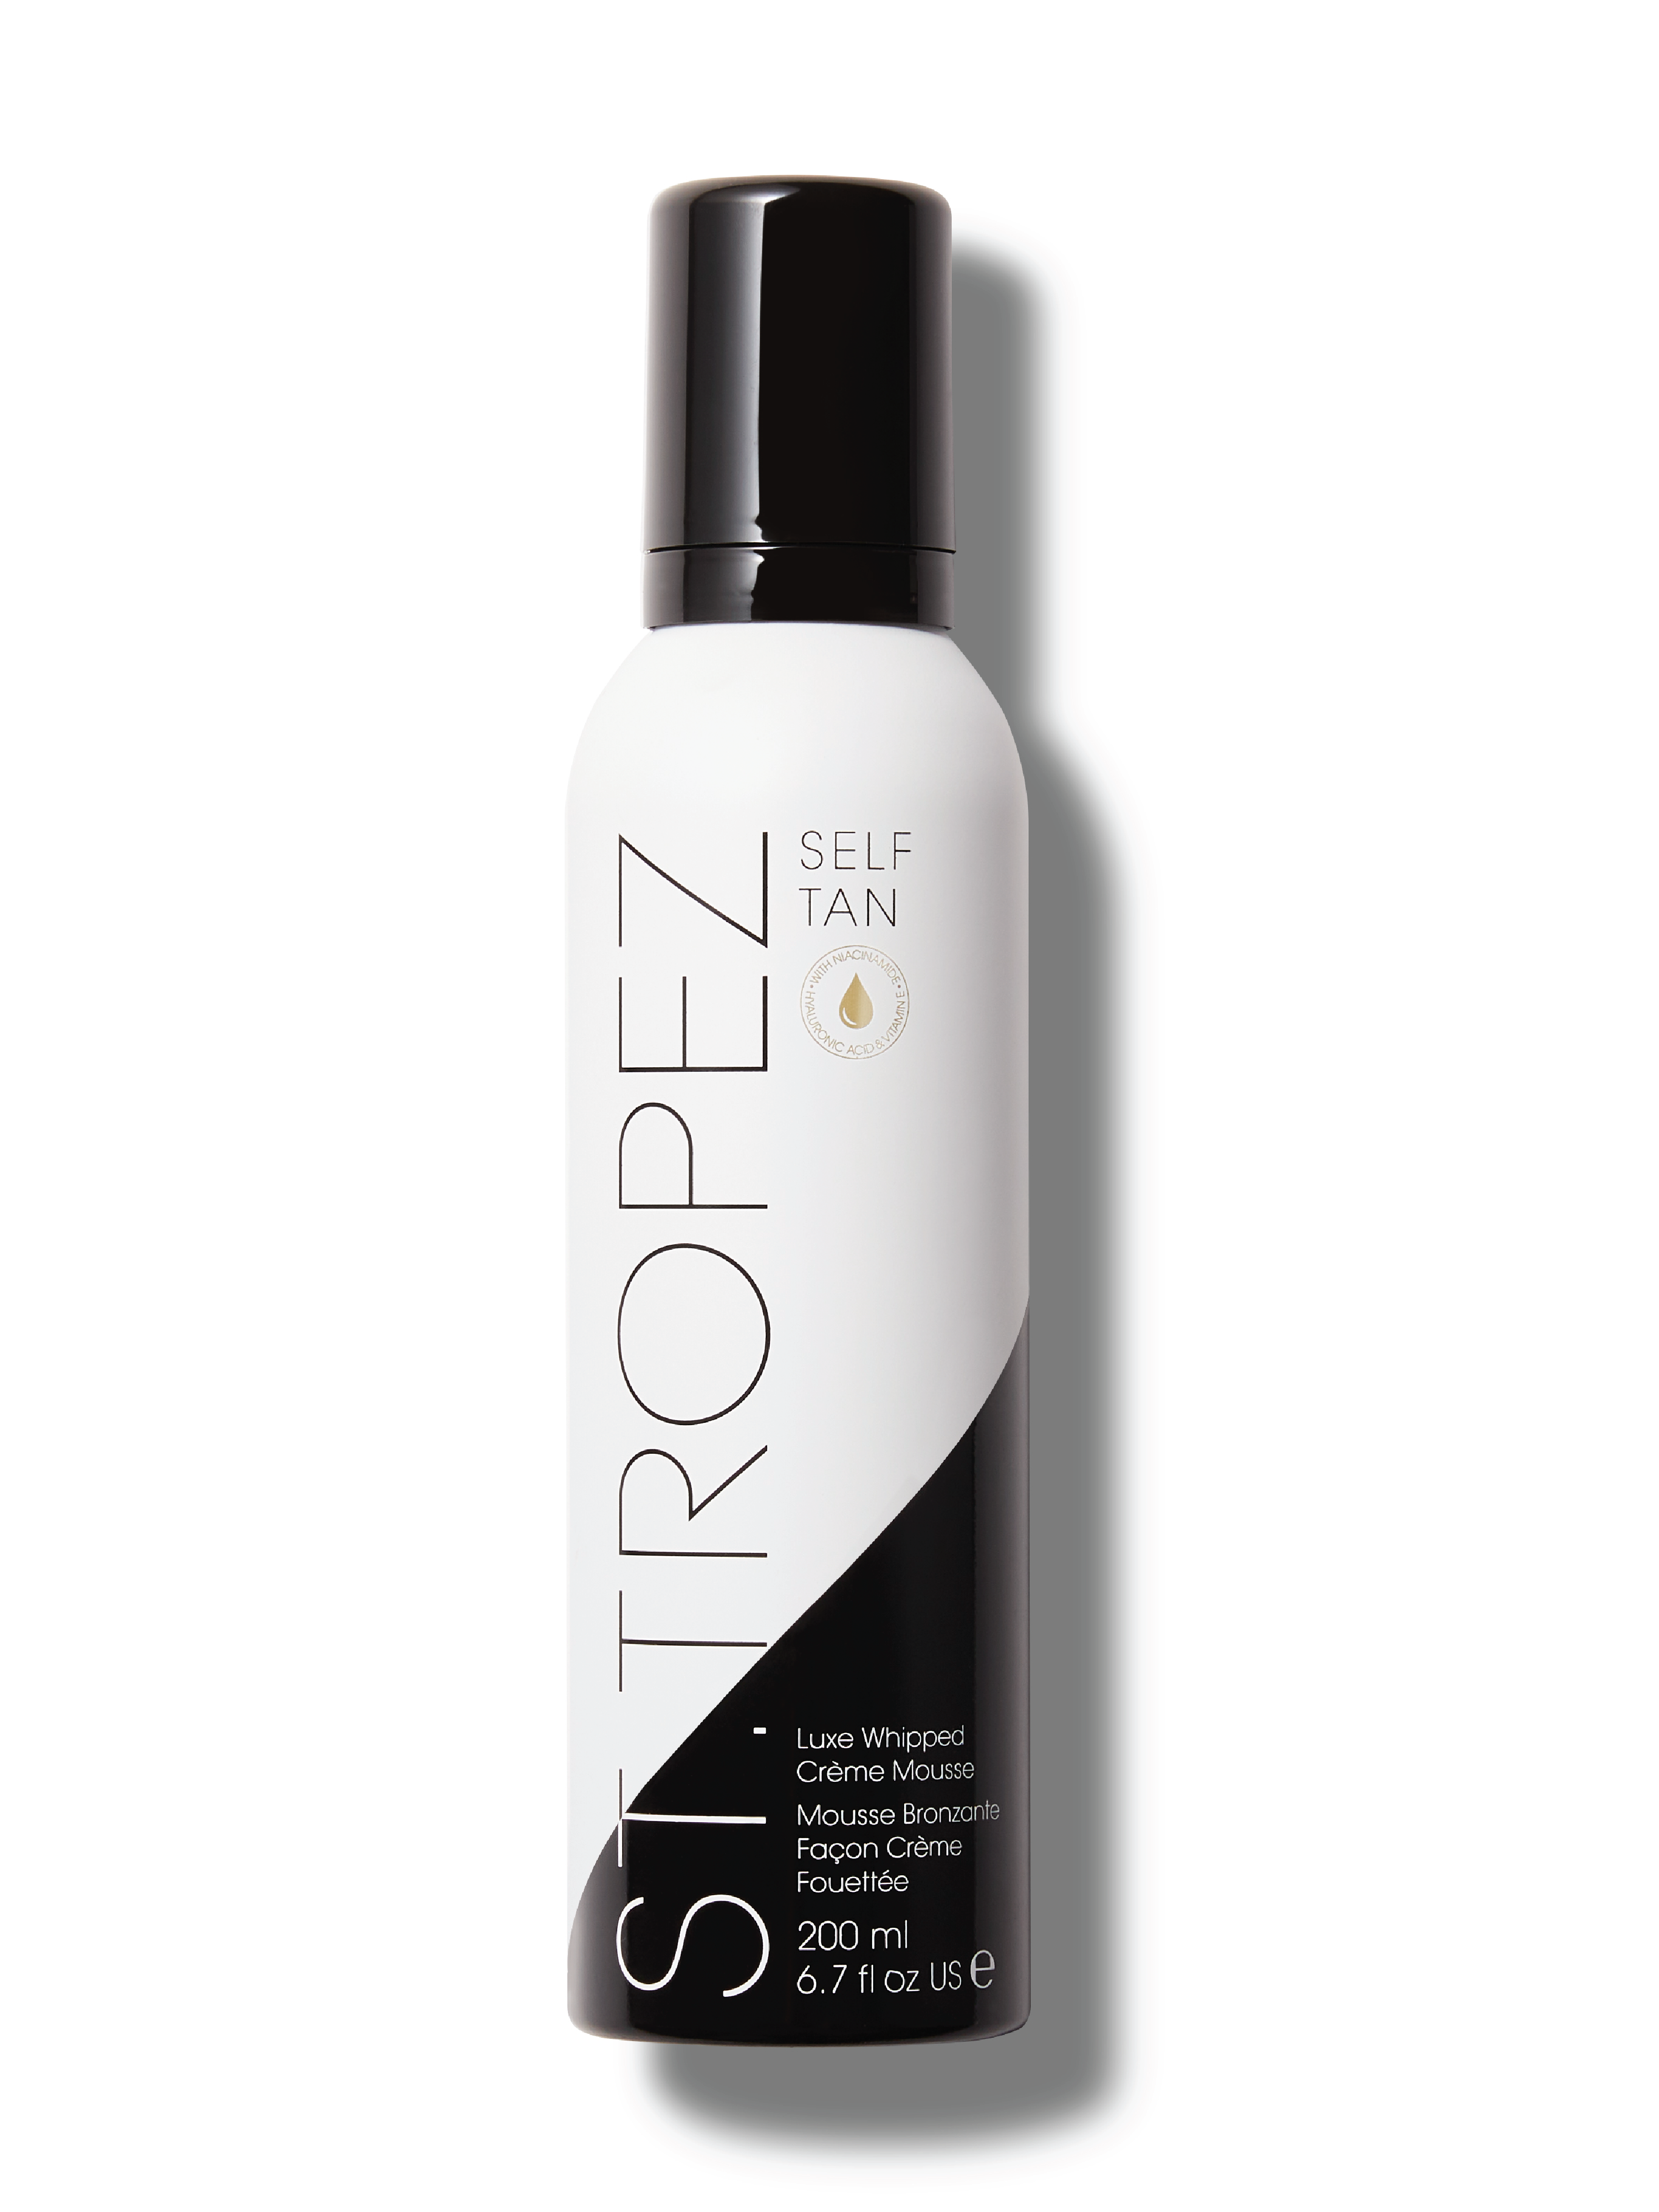 St.Tropez Luxe Whipped Crème Mousse, 200 ml